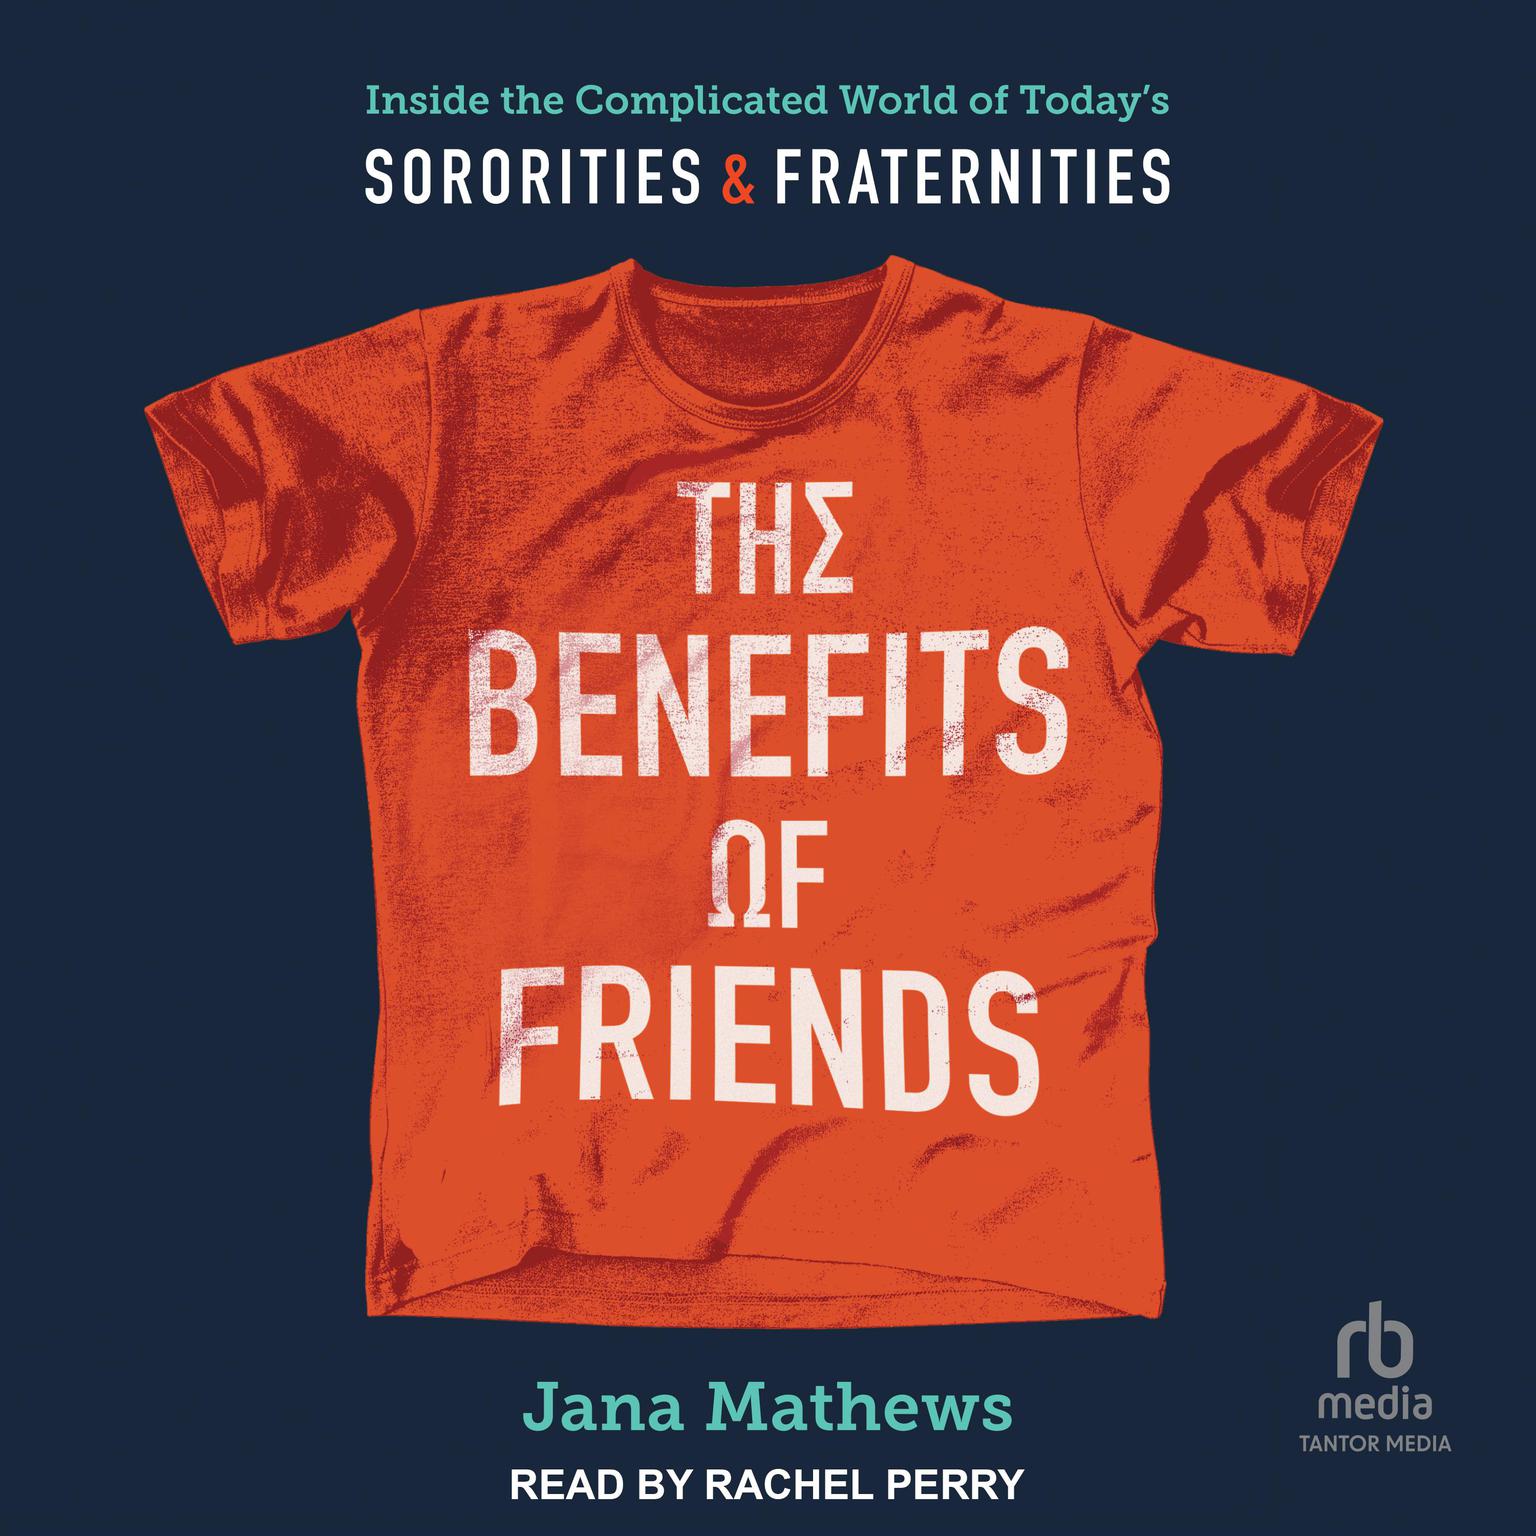 The Benefits of Friends: Inside the Complicated World of Todays Sororities and Fraternities Audiobook, by Jana Mathews